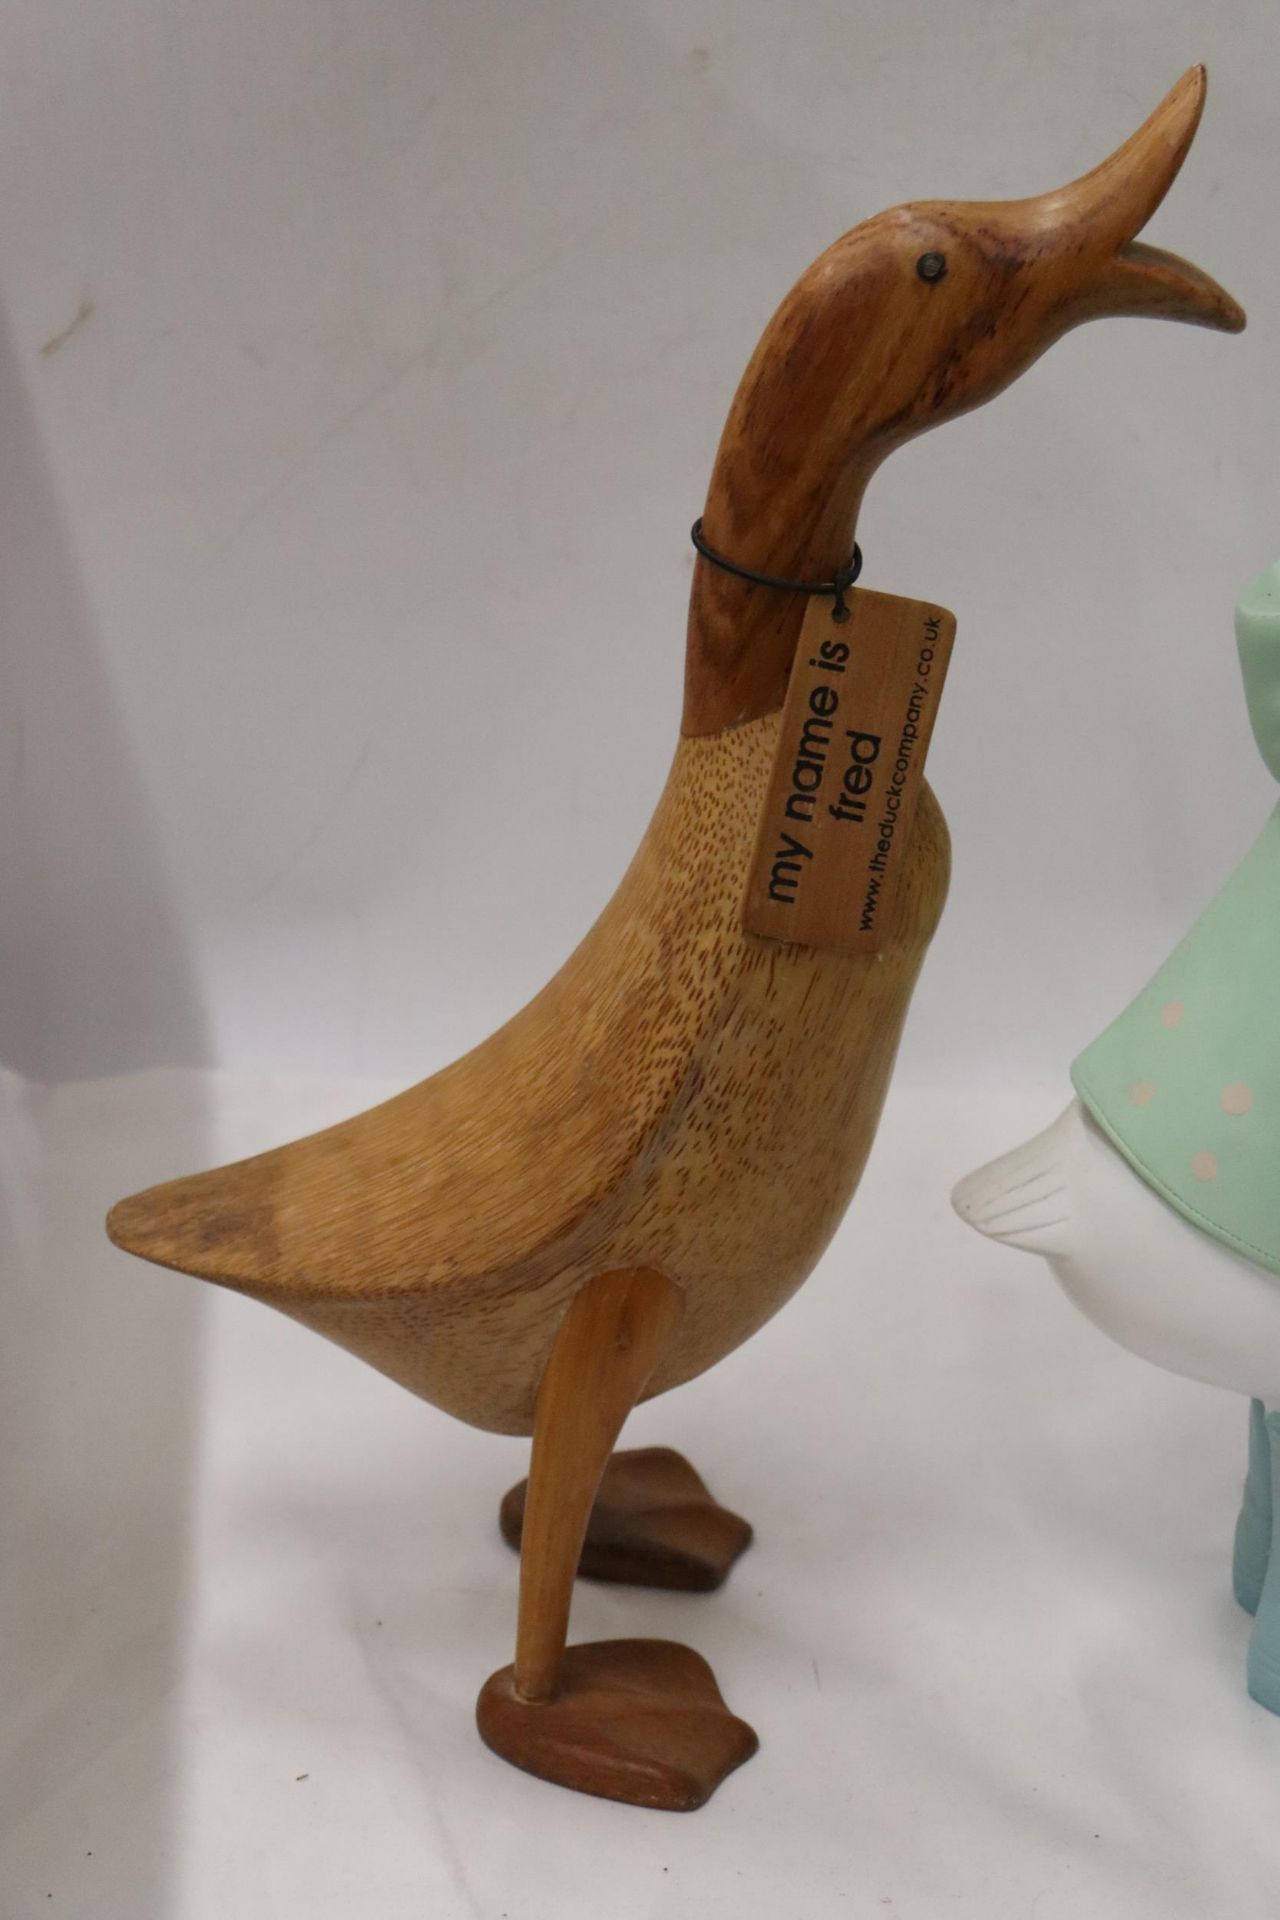 A WOODEN DUCK FROM 'THE DUCK COMPANY' CALLED FRED PLUS A PAINTED DUCK, HEIGHTS 42CM - Image 3 of 7